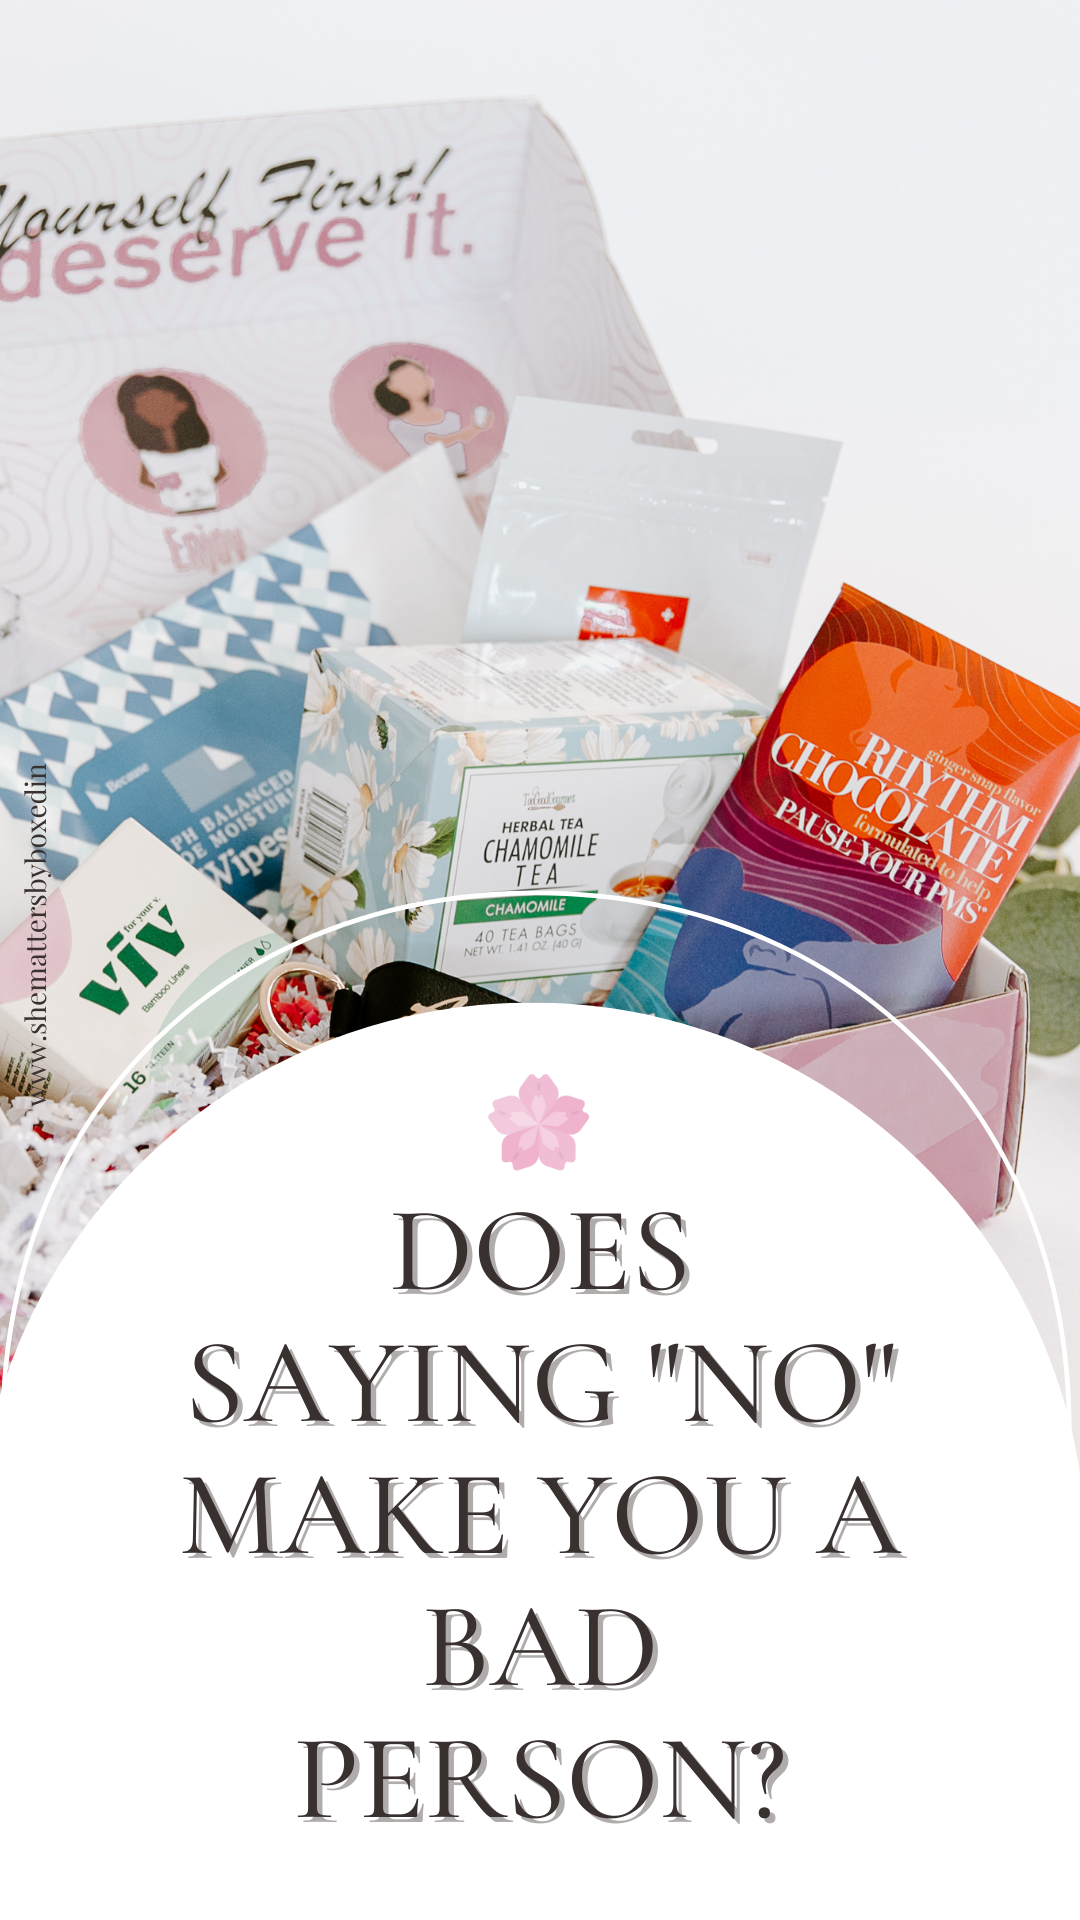 Does Saying No Make You A Mean Person?